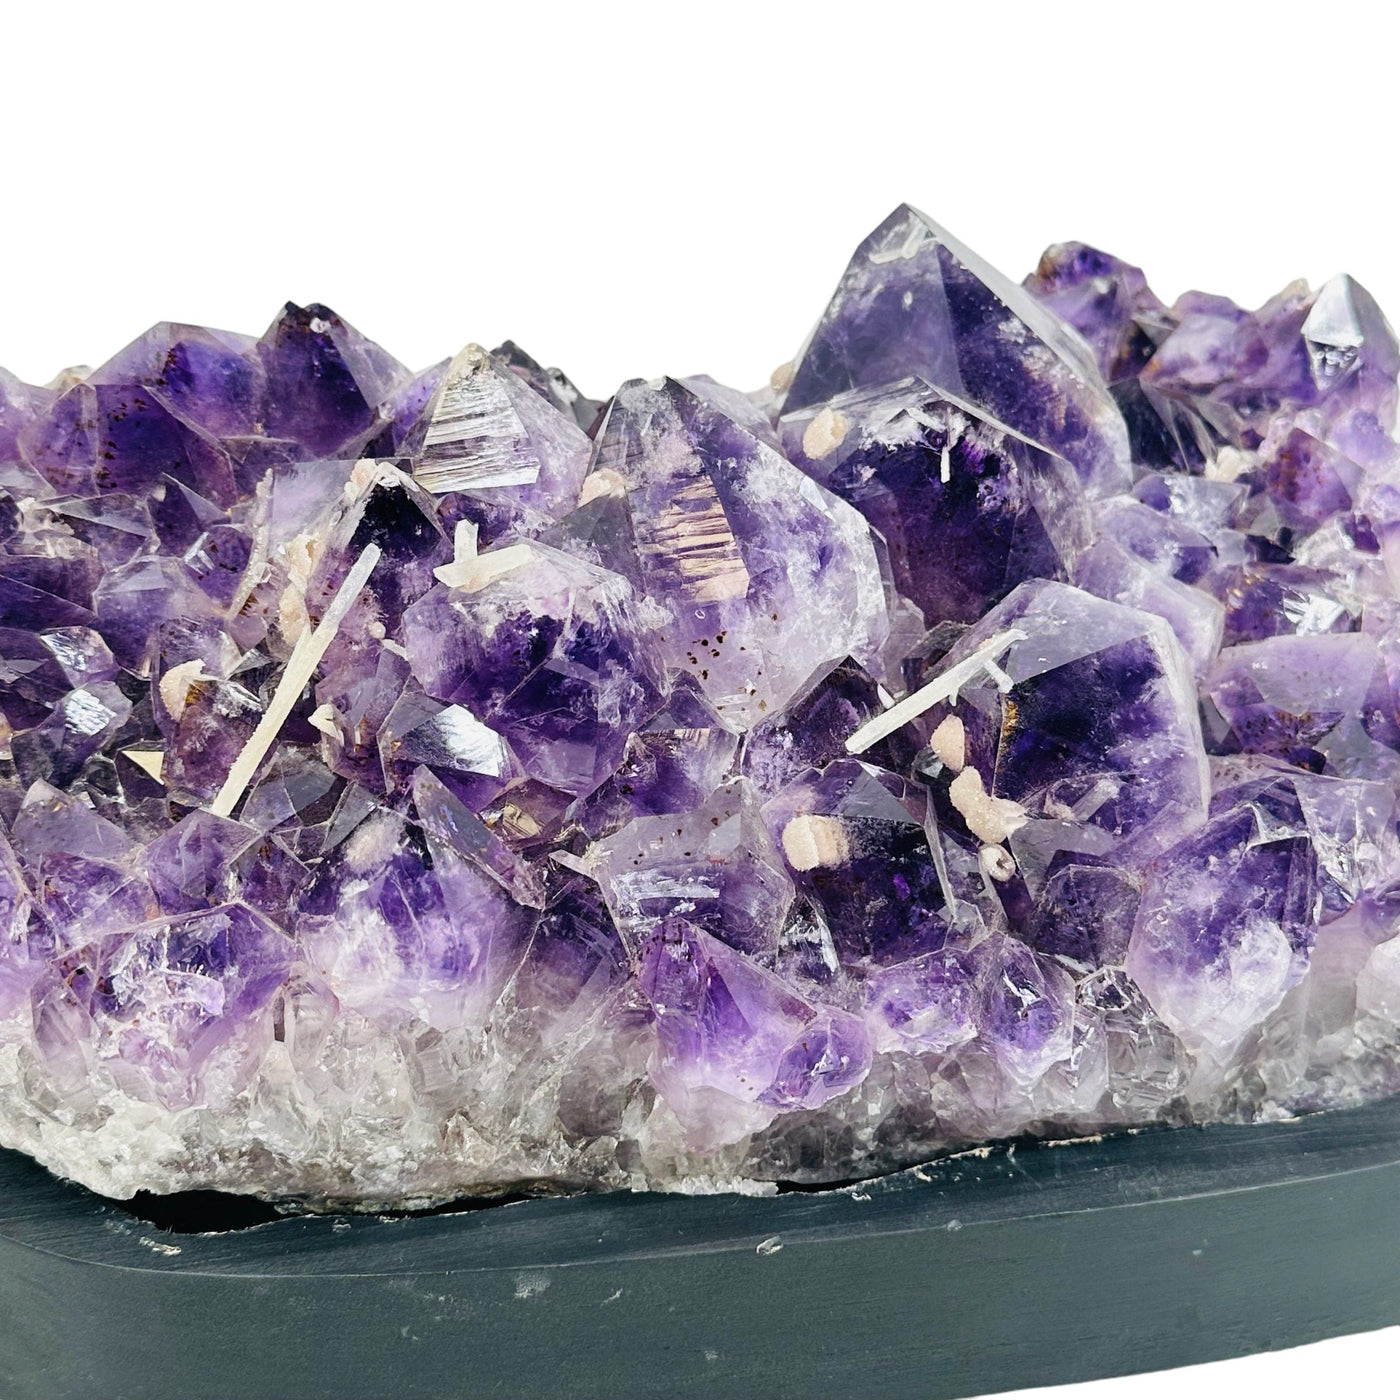 close up of the amethyst clusters with druzy formations on the top 